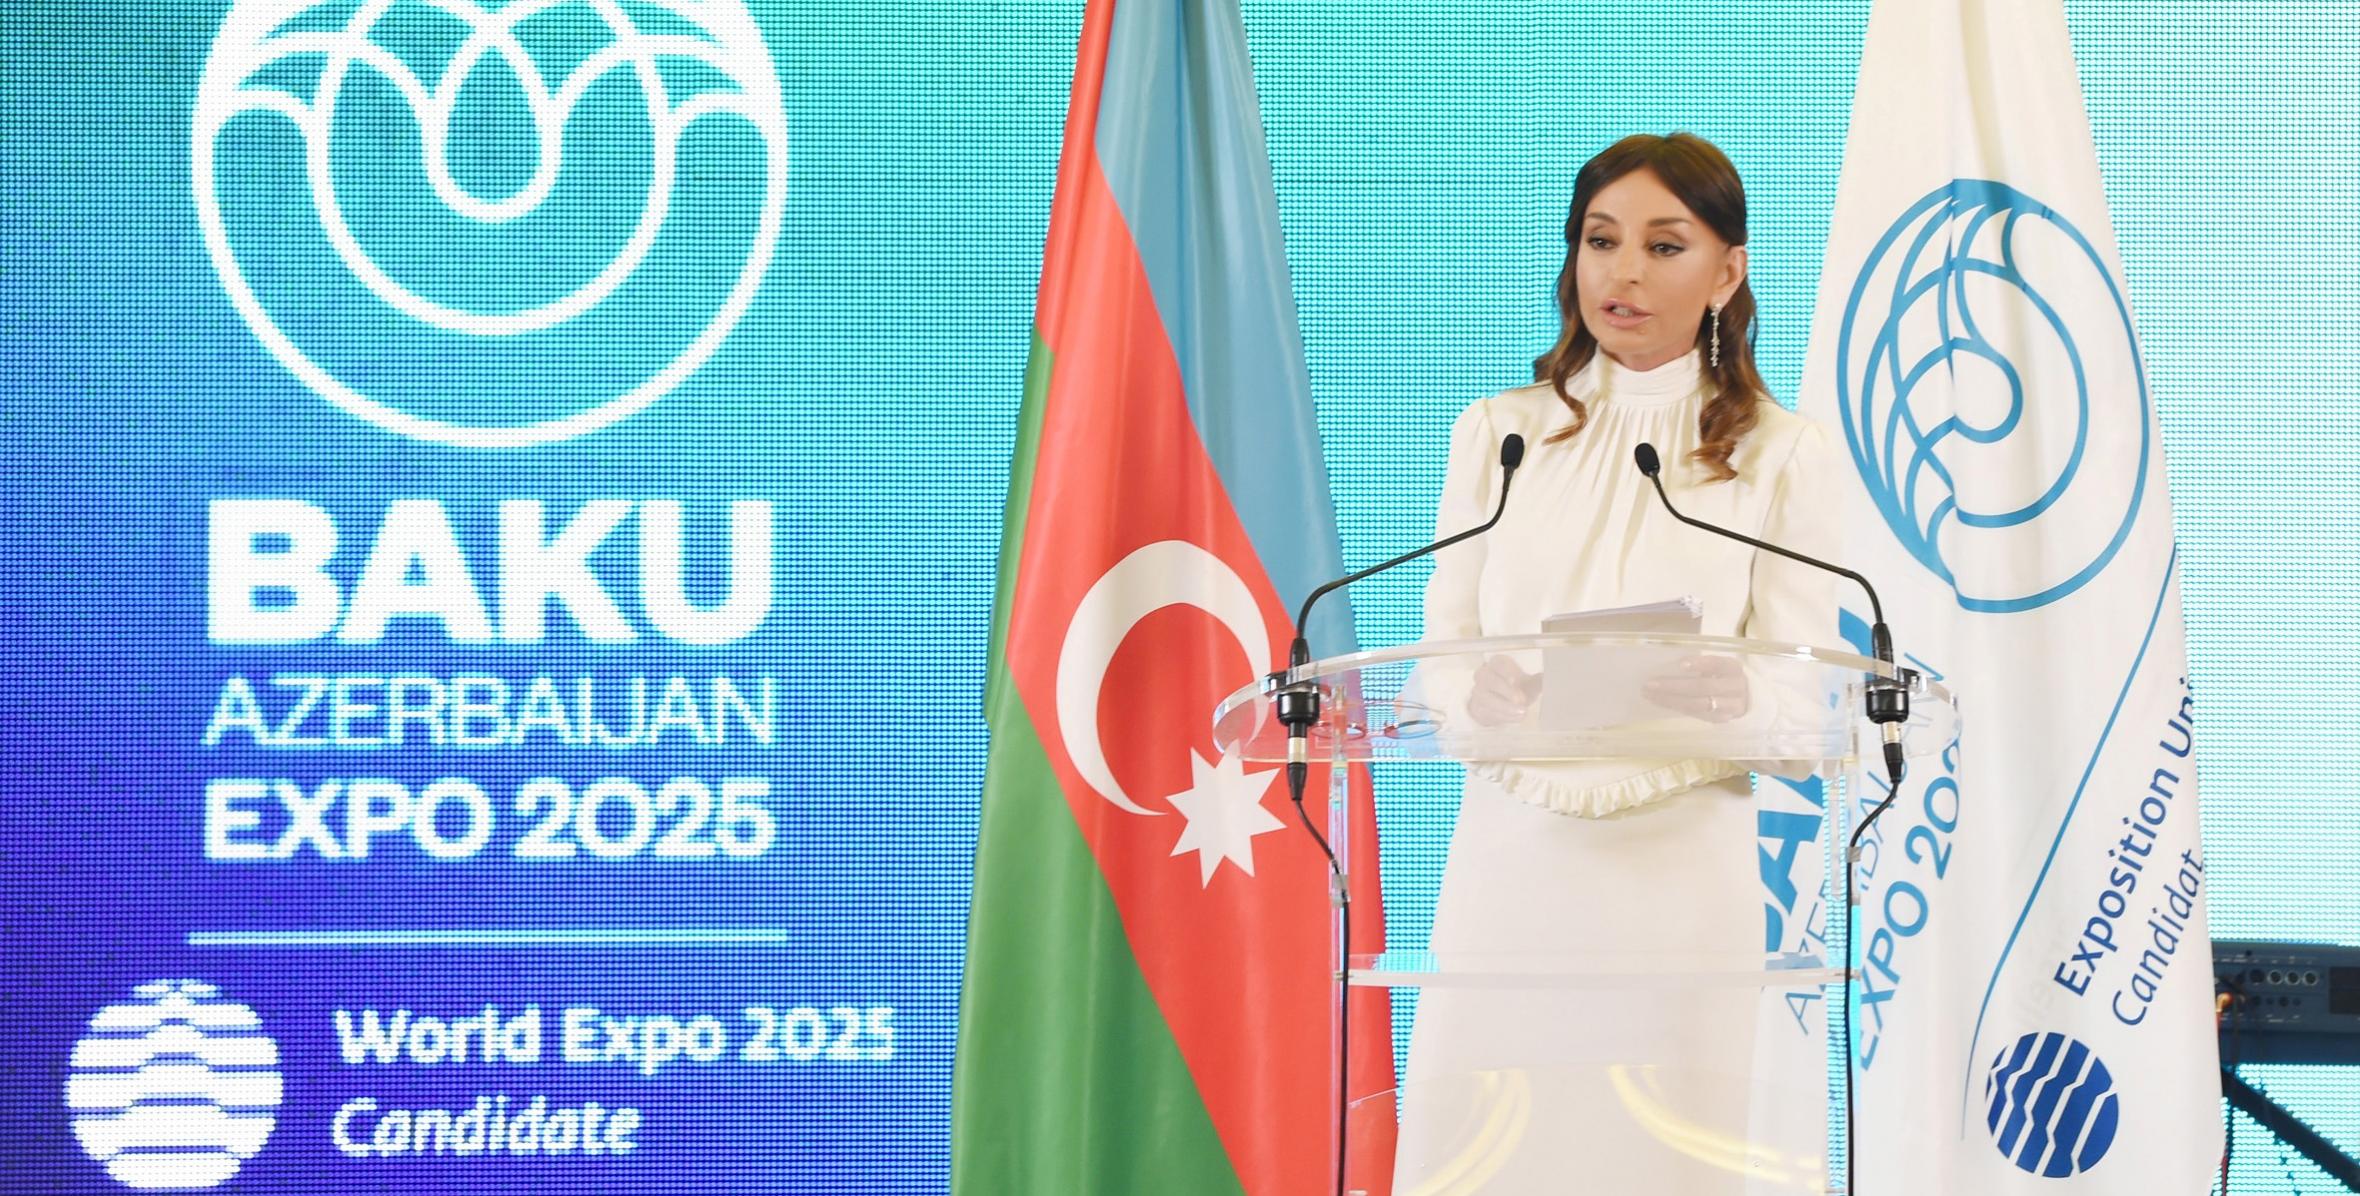 First Vice President Mehriban Aliyeva attends event in honor of Baku`s bid to host World Expo in 2025